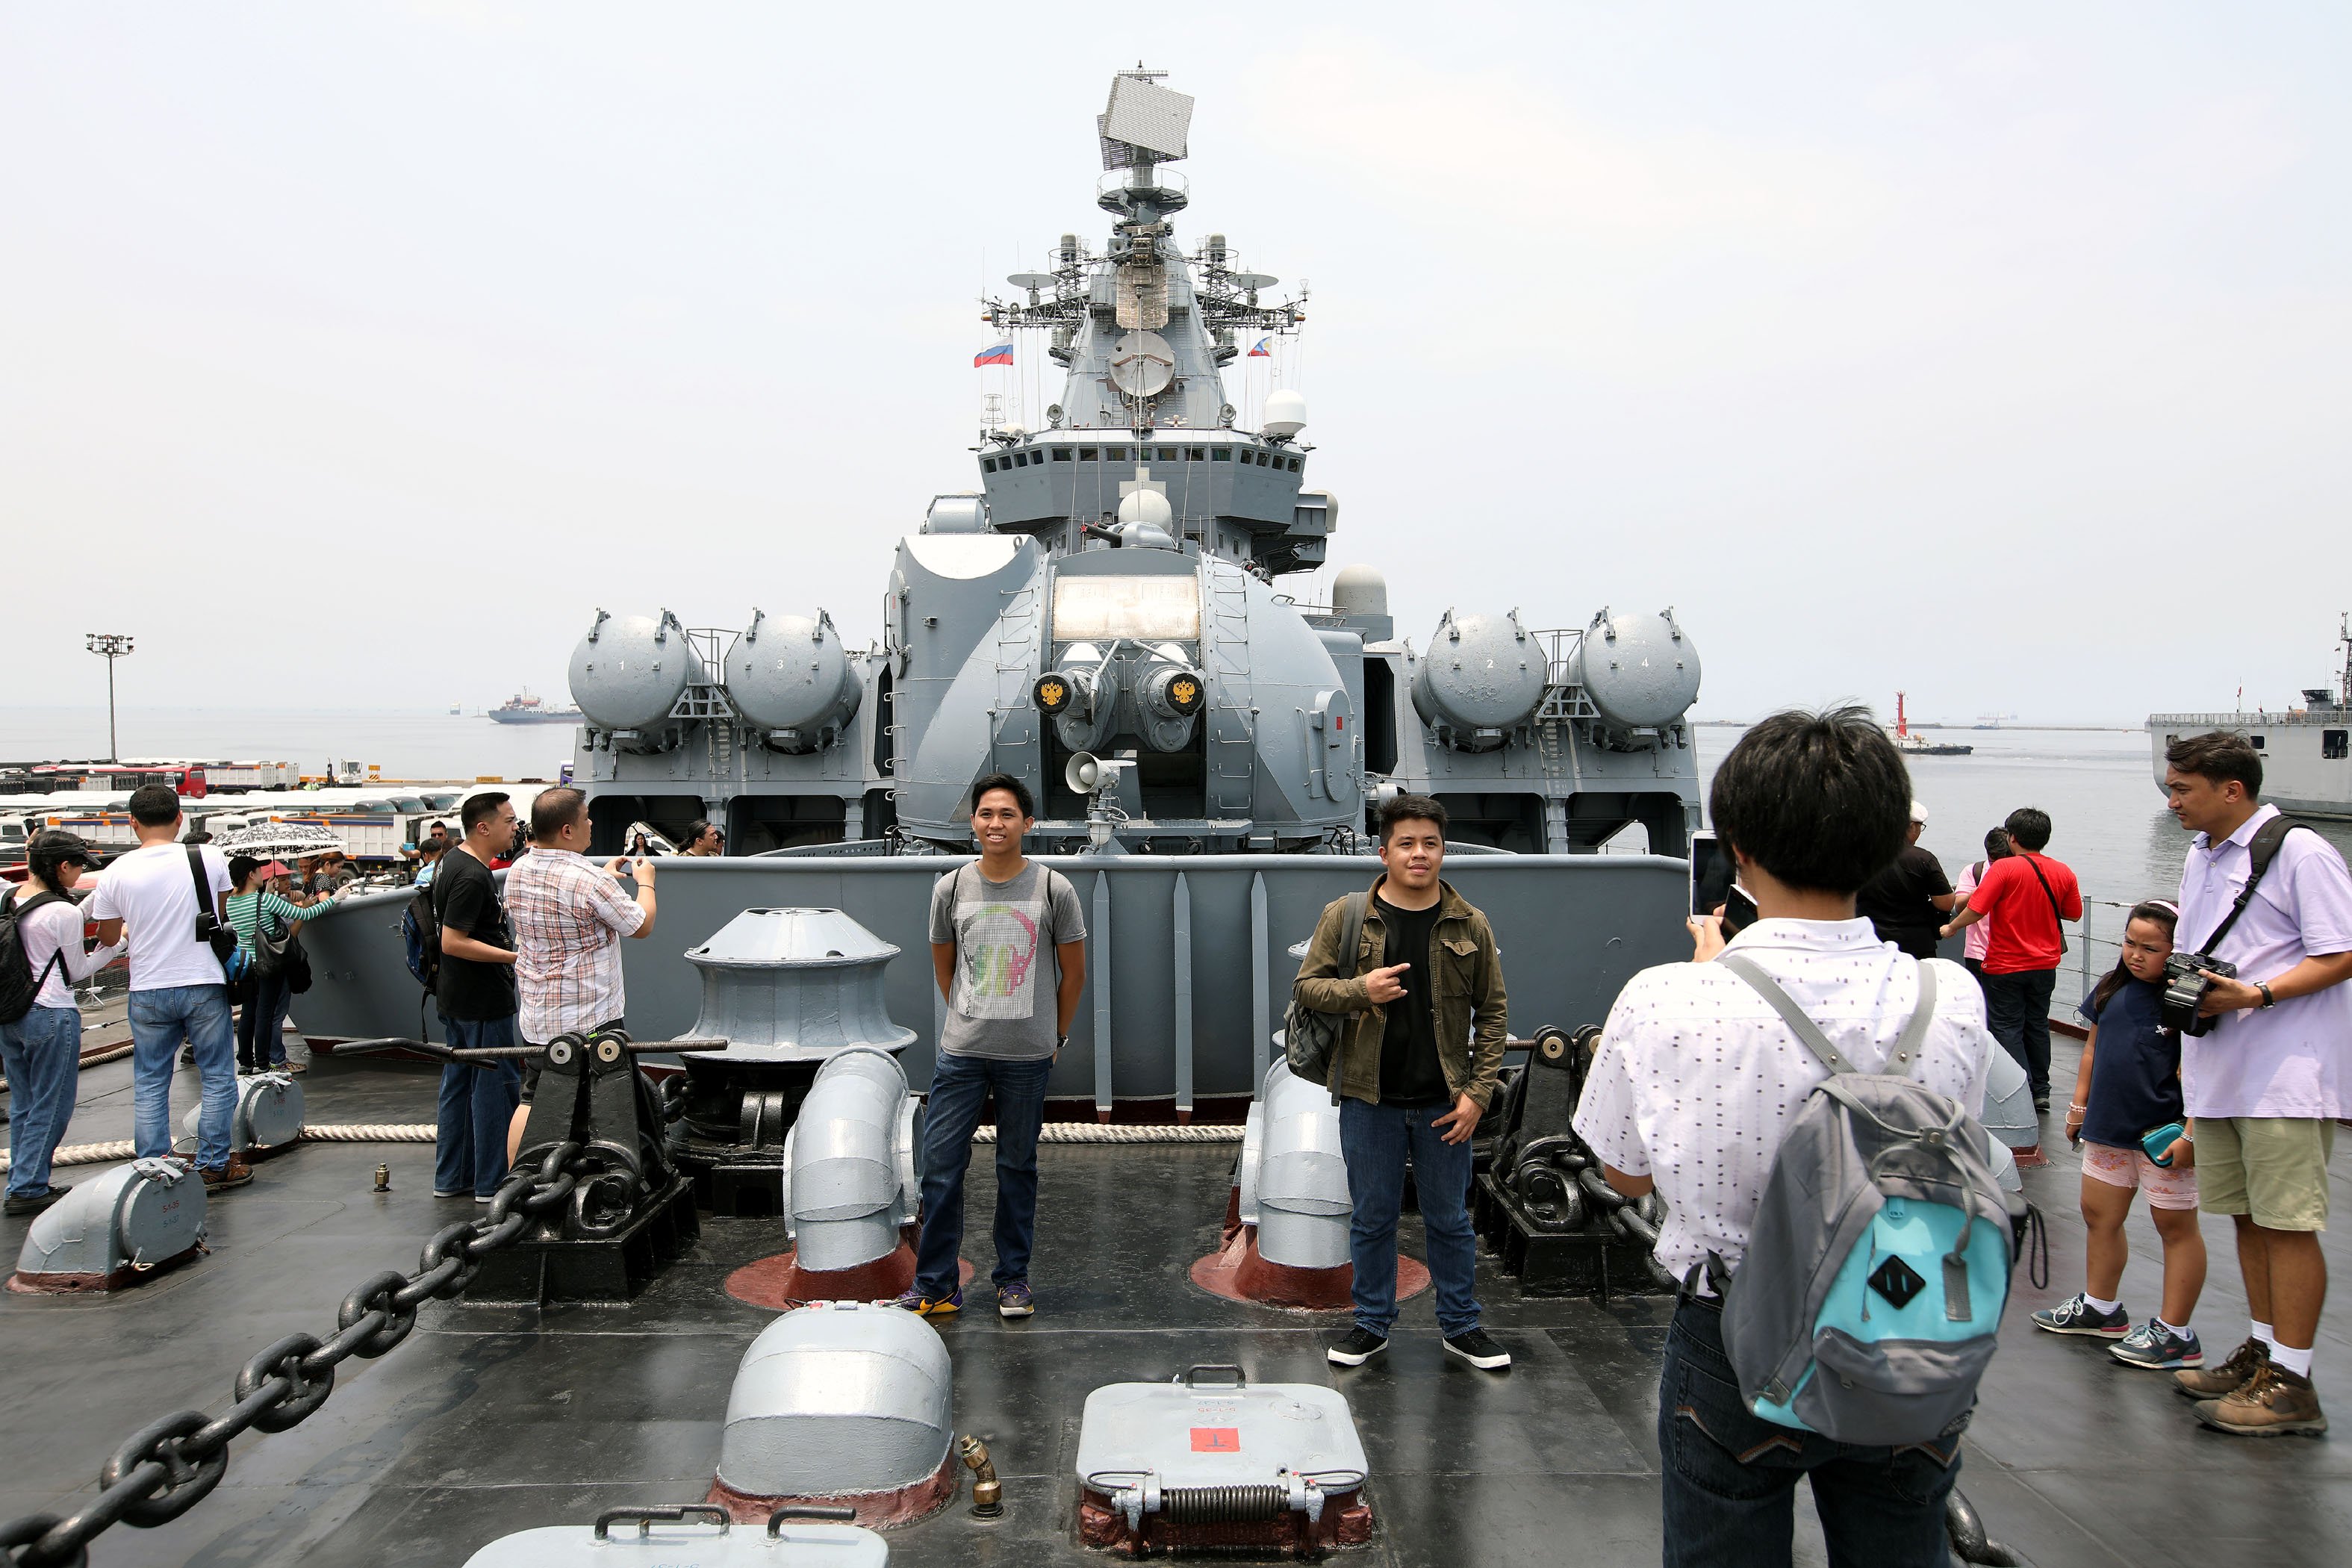 On board Russia's guided missile cruiser